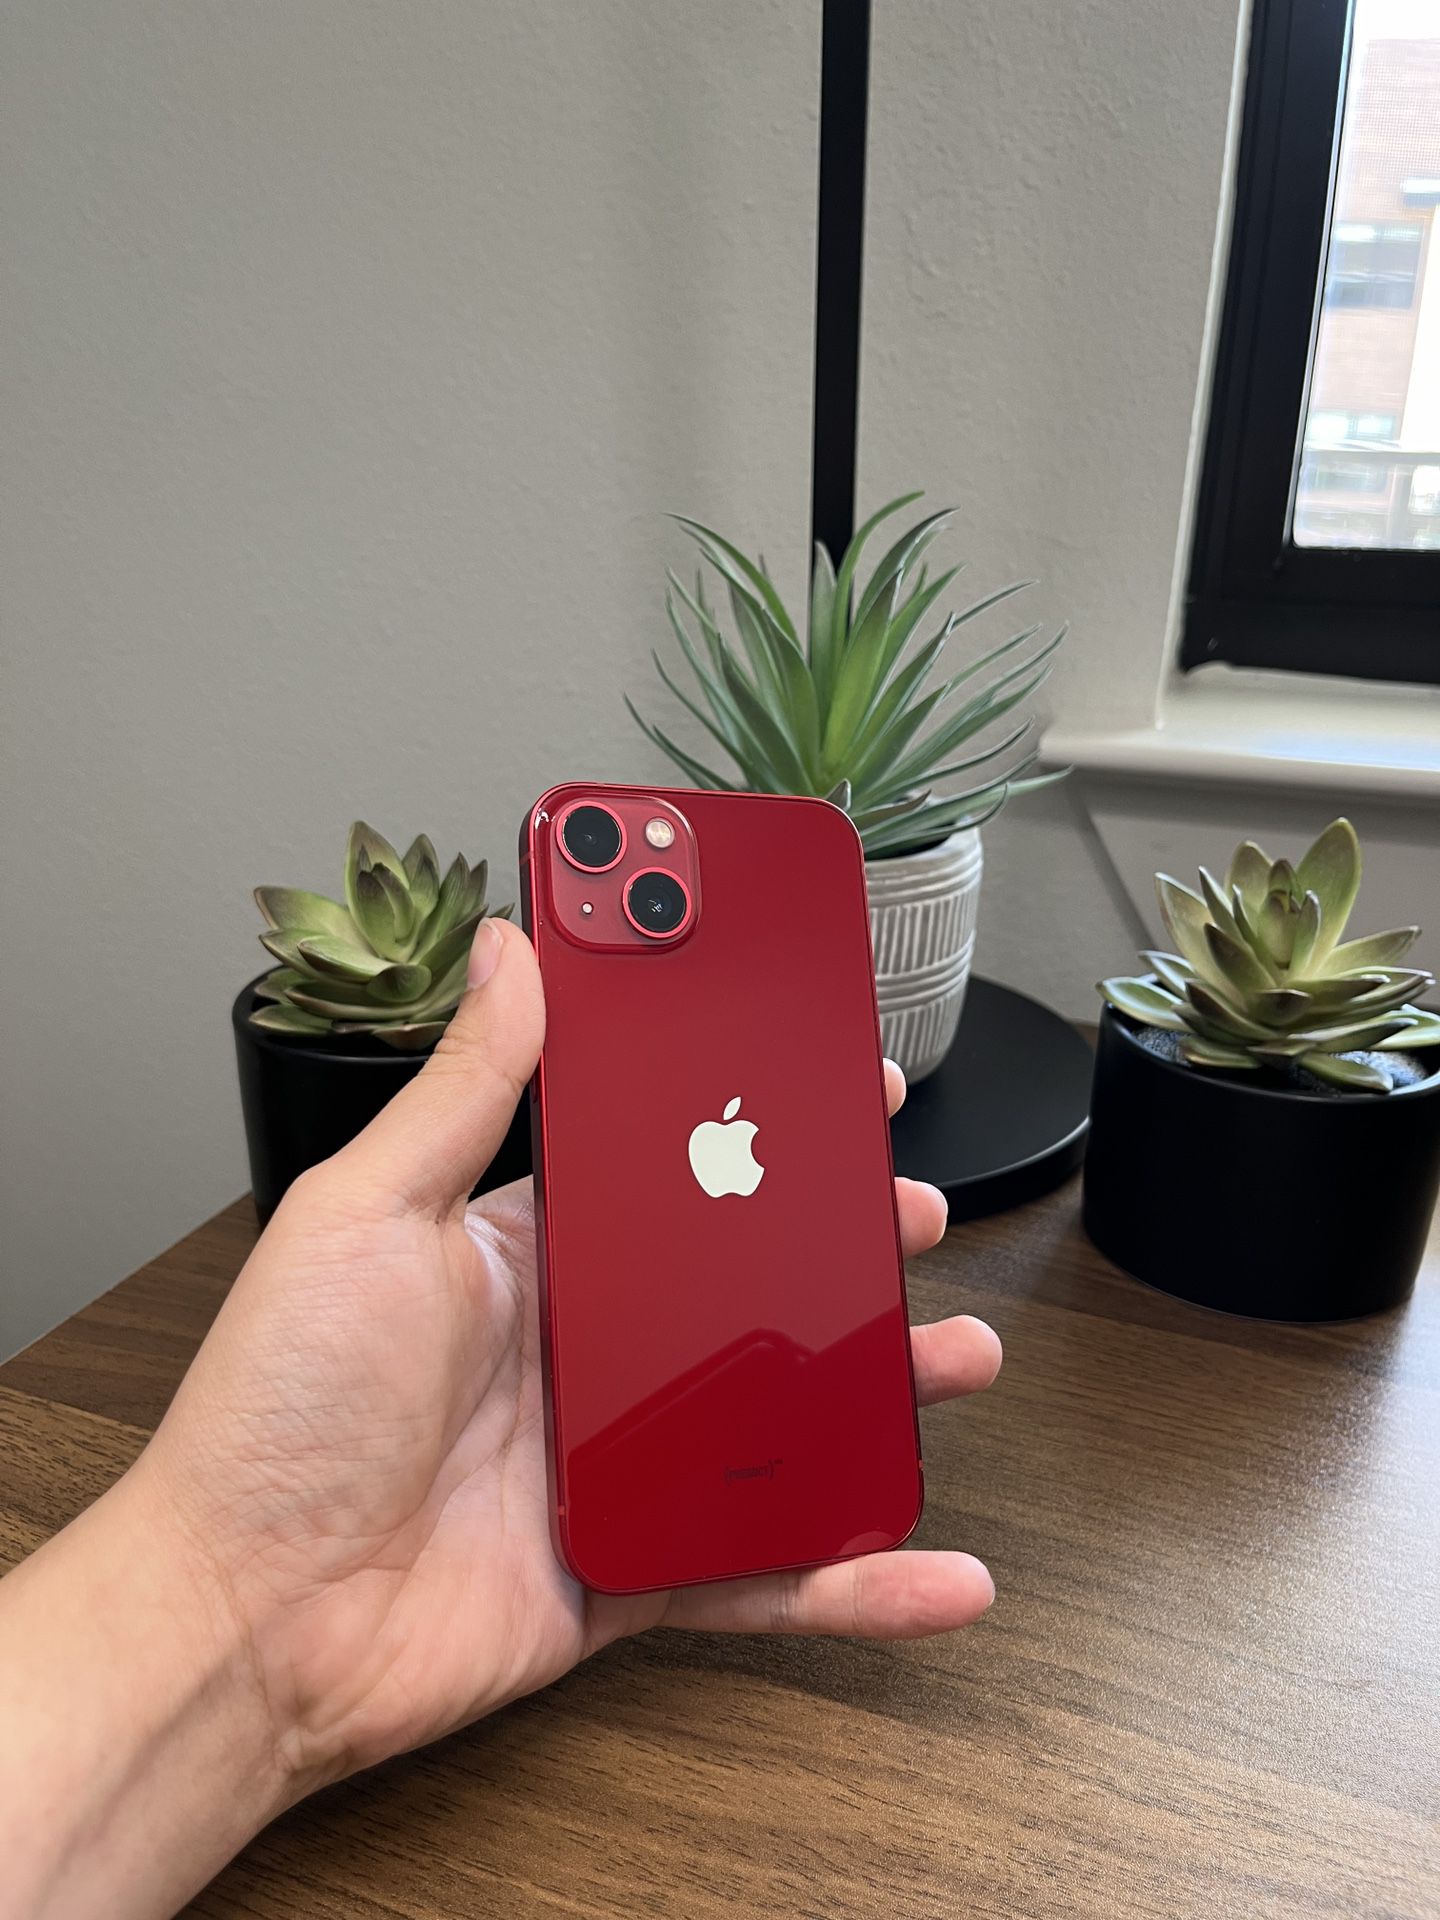 iPhone 13 128gb Product Red ♥️ Unlocked Any Carrier! Verizon AT&T Cricket T-mobile Metro Mexico Tambien 🇲🇽 international